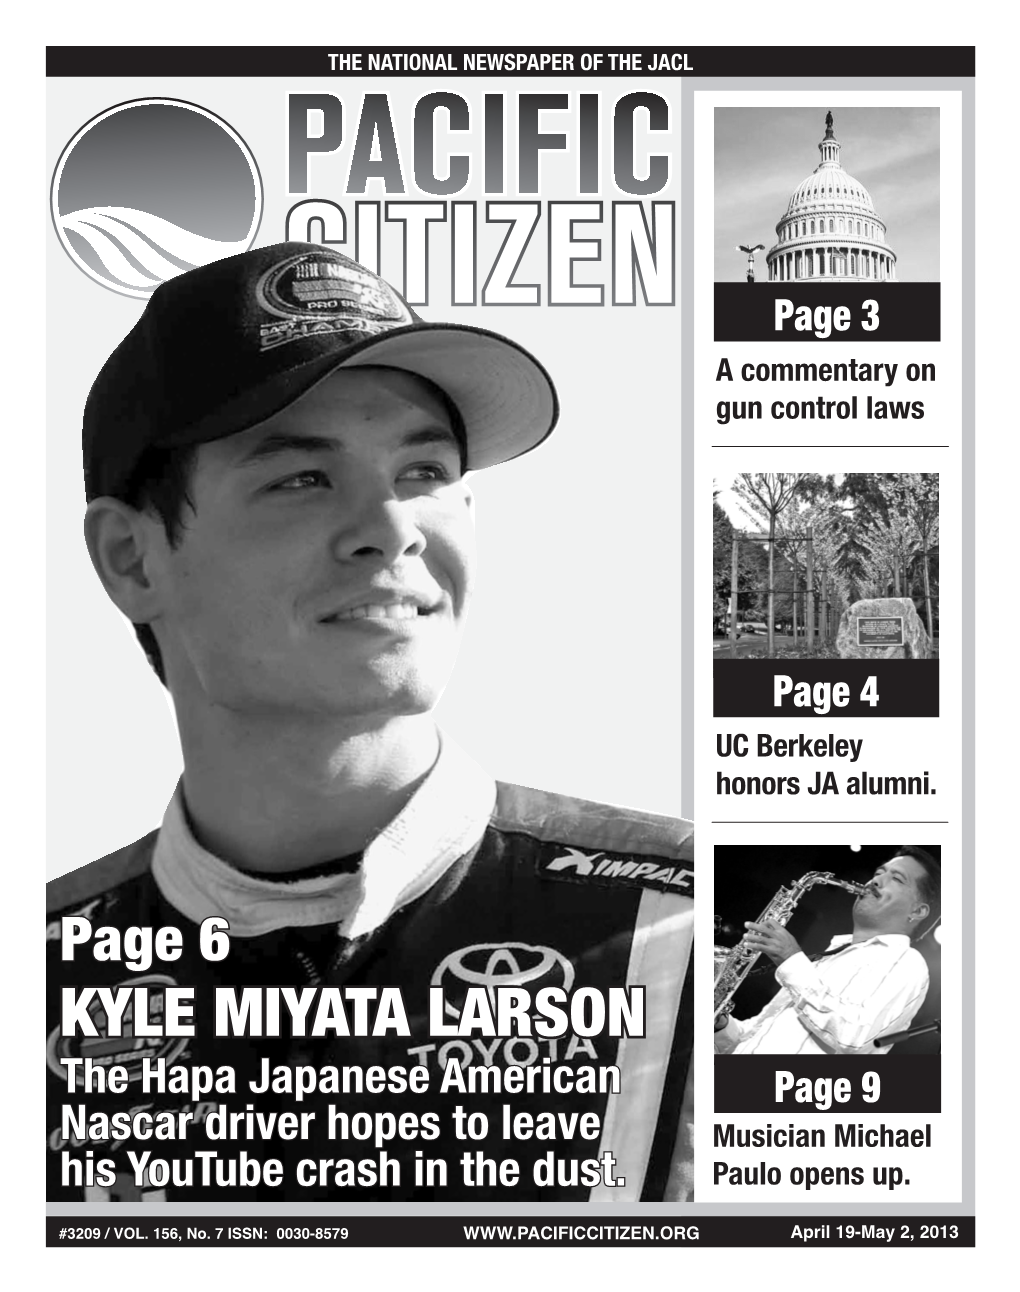 KYLE MIYATA LARSON the Hapa Japanese American Page 9 Nascar Driver Hopes to Leave Musician Michael His Youtube Crash in the Dust